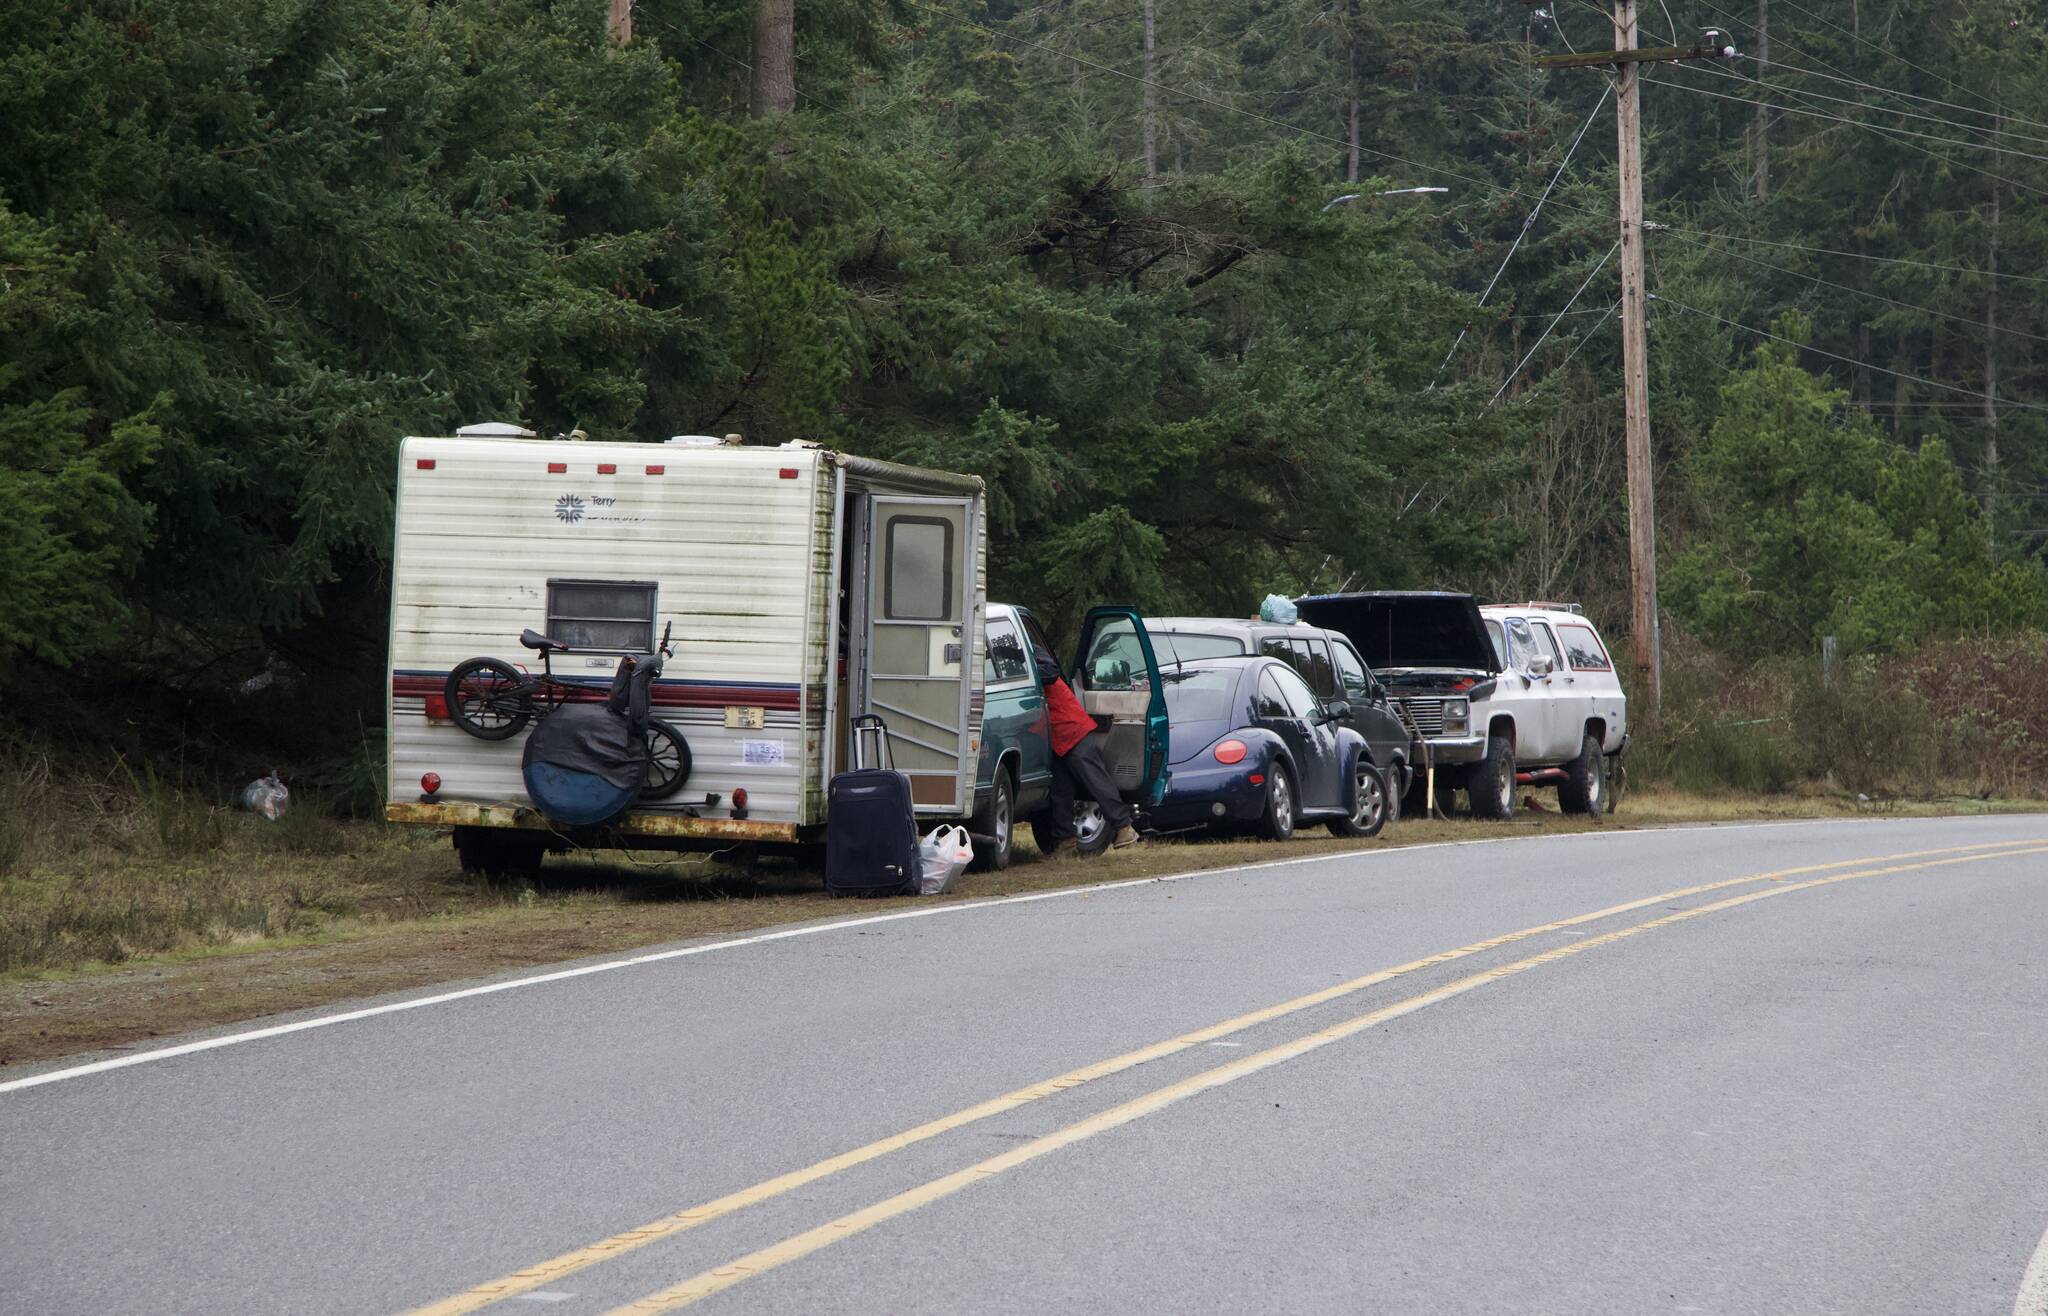 Photo by Rachel Rosen/Whidbey News-Times
Two clusters of RVs and vehicles are permanently parked on either side of Hoffman Road.